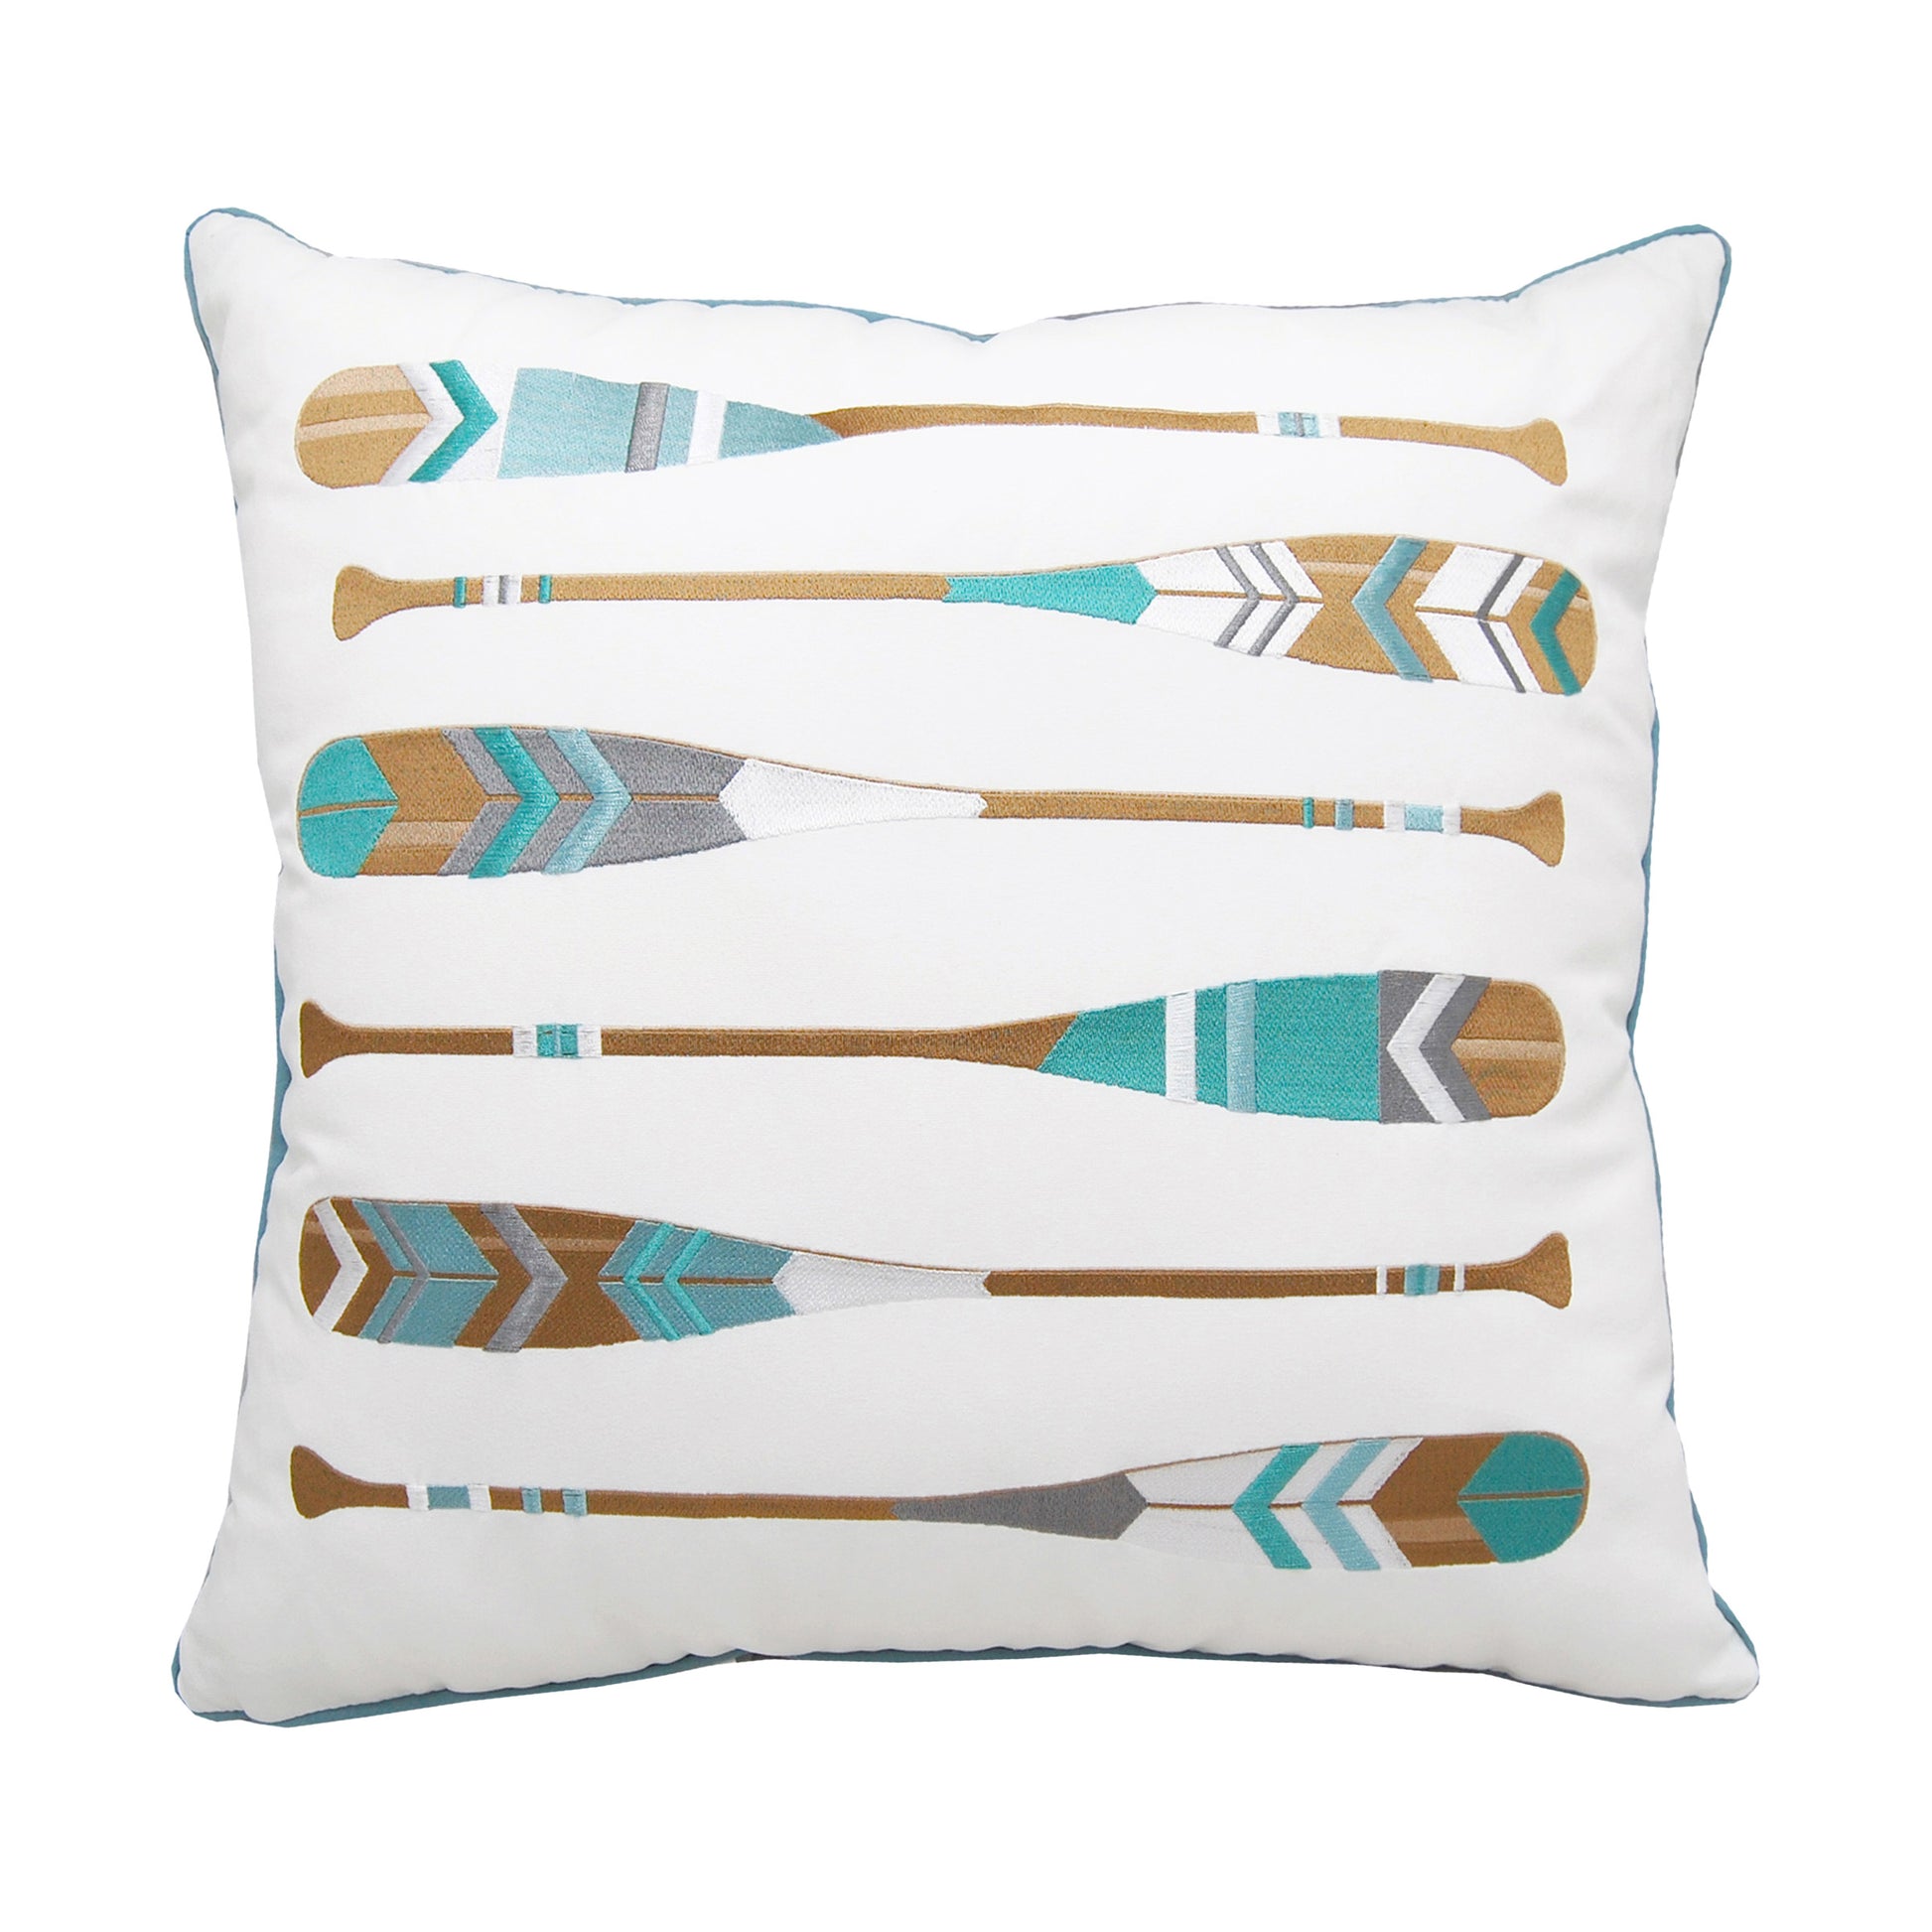 The Lake Oars Indoor Outdoor pillow has six alternating oars with teal, lightblue, white, and grey geometric designs embroidered on a white background.